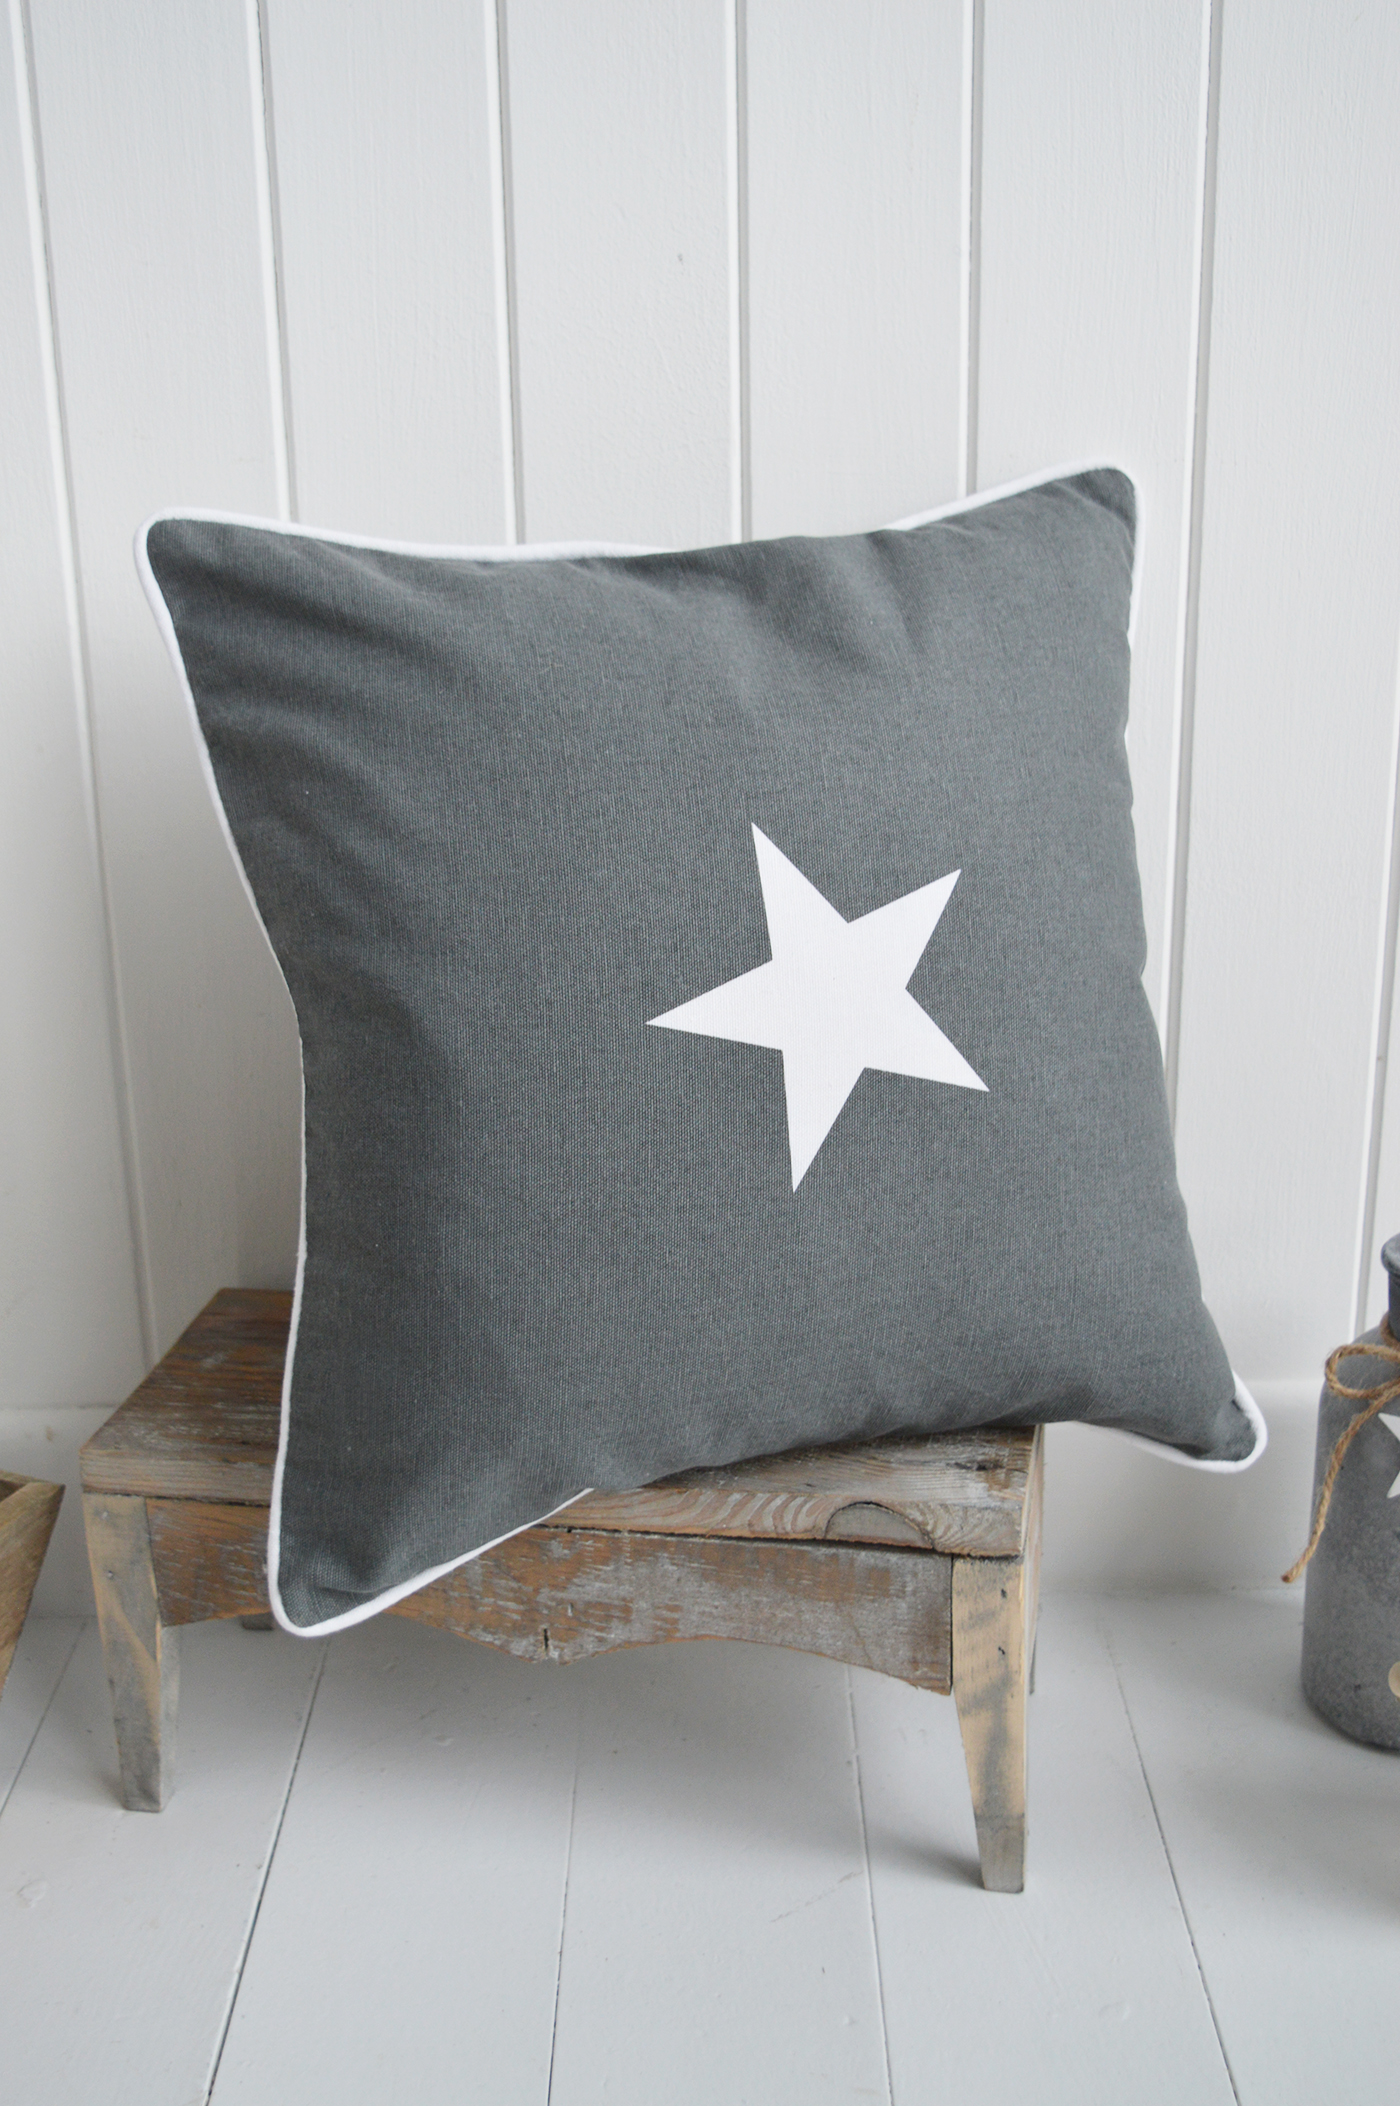 New England style cushions for home interiors - Grey Star Cushion 